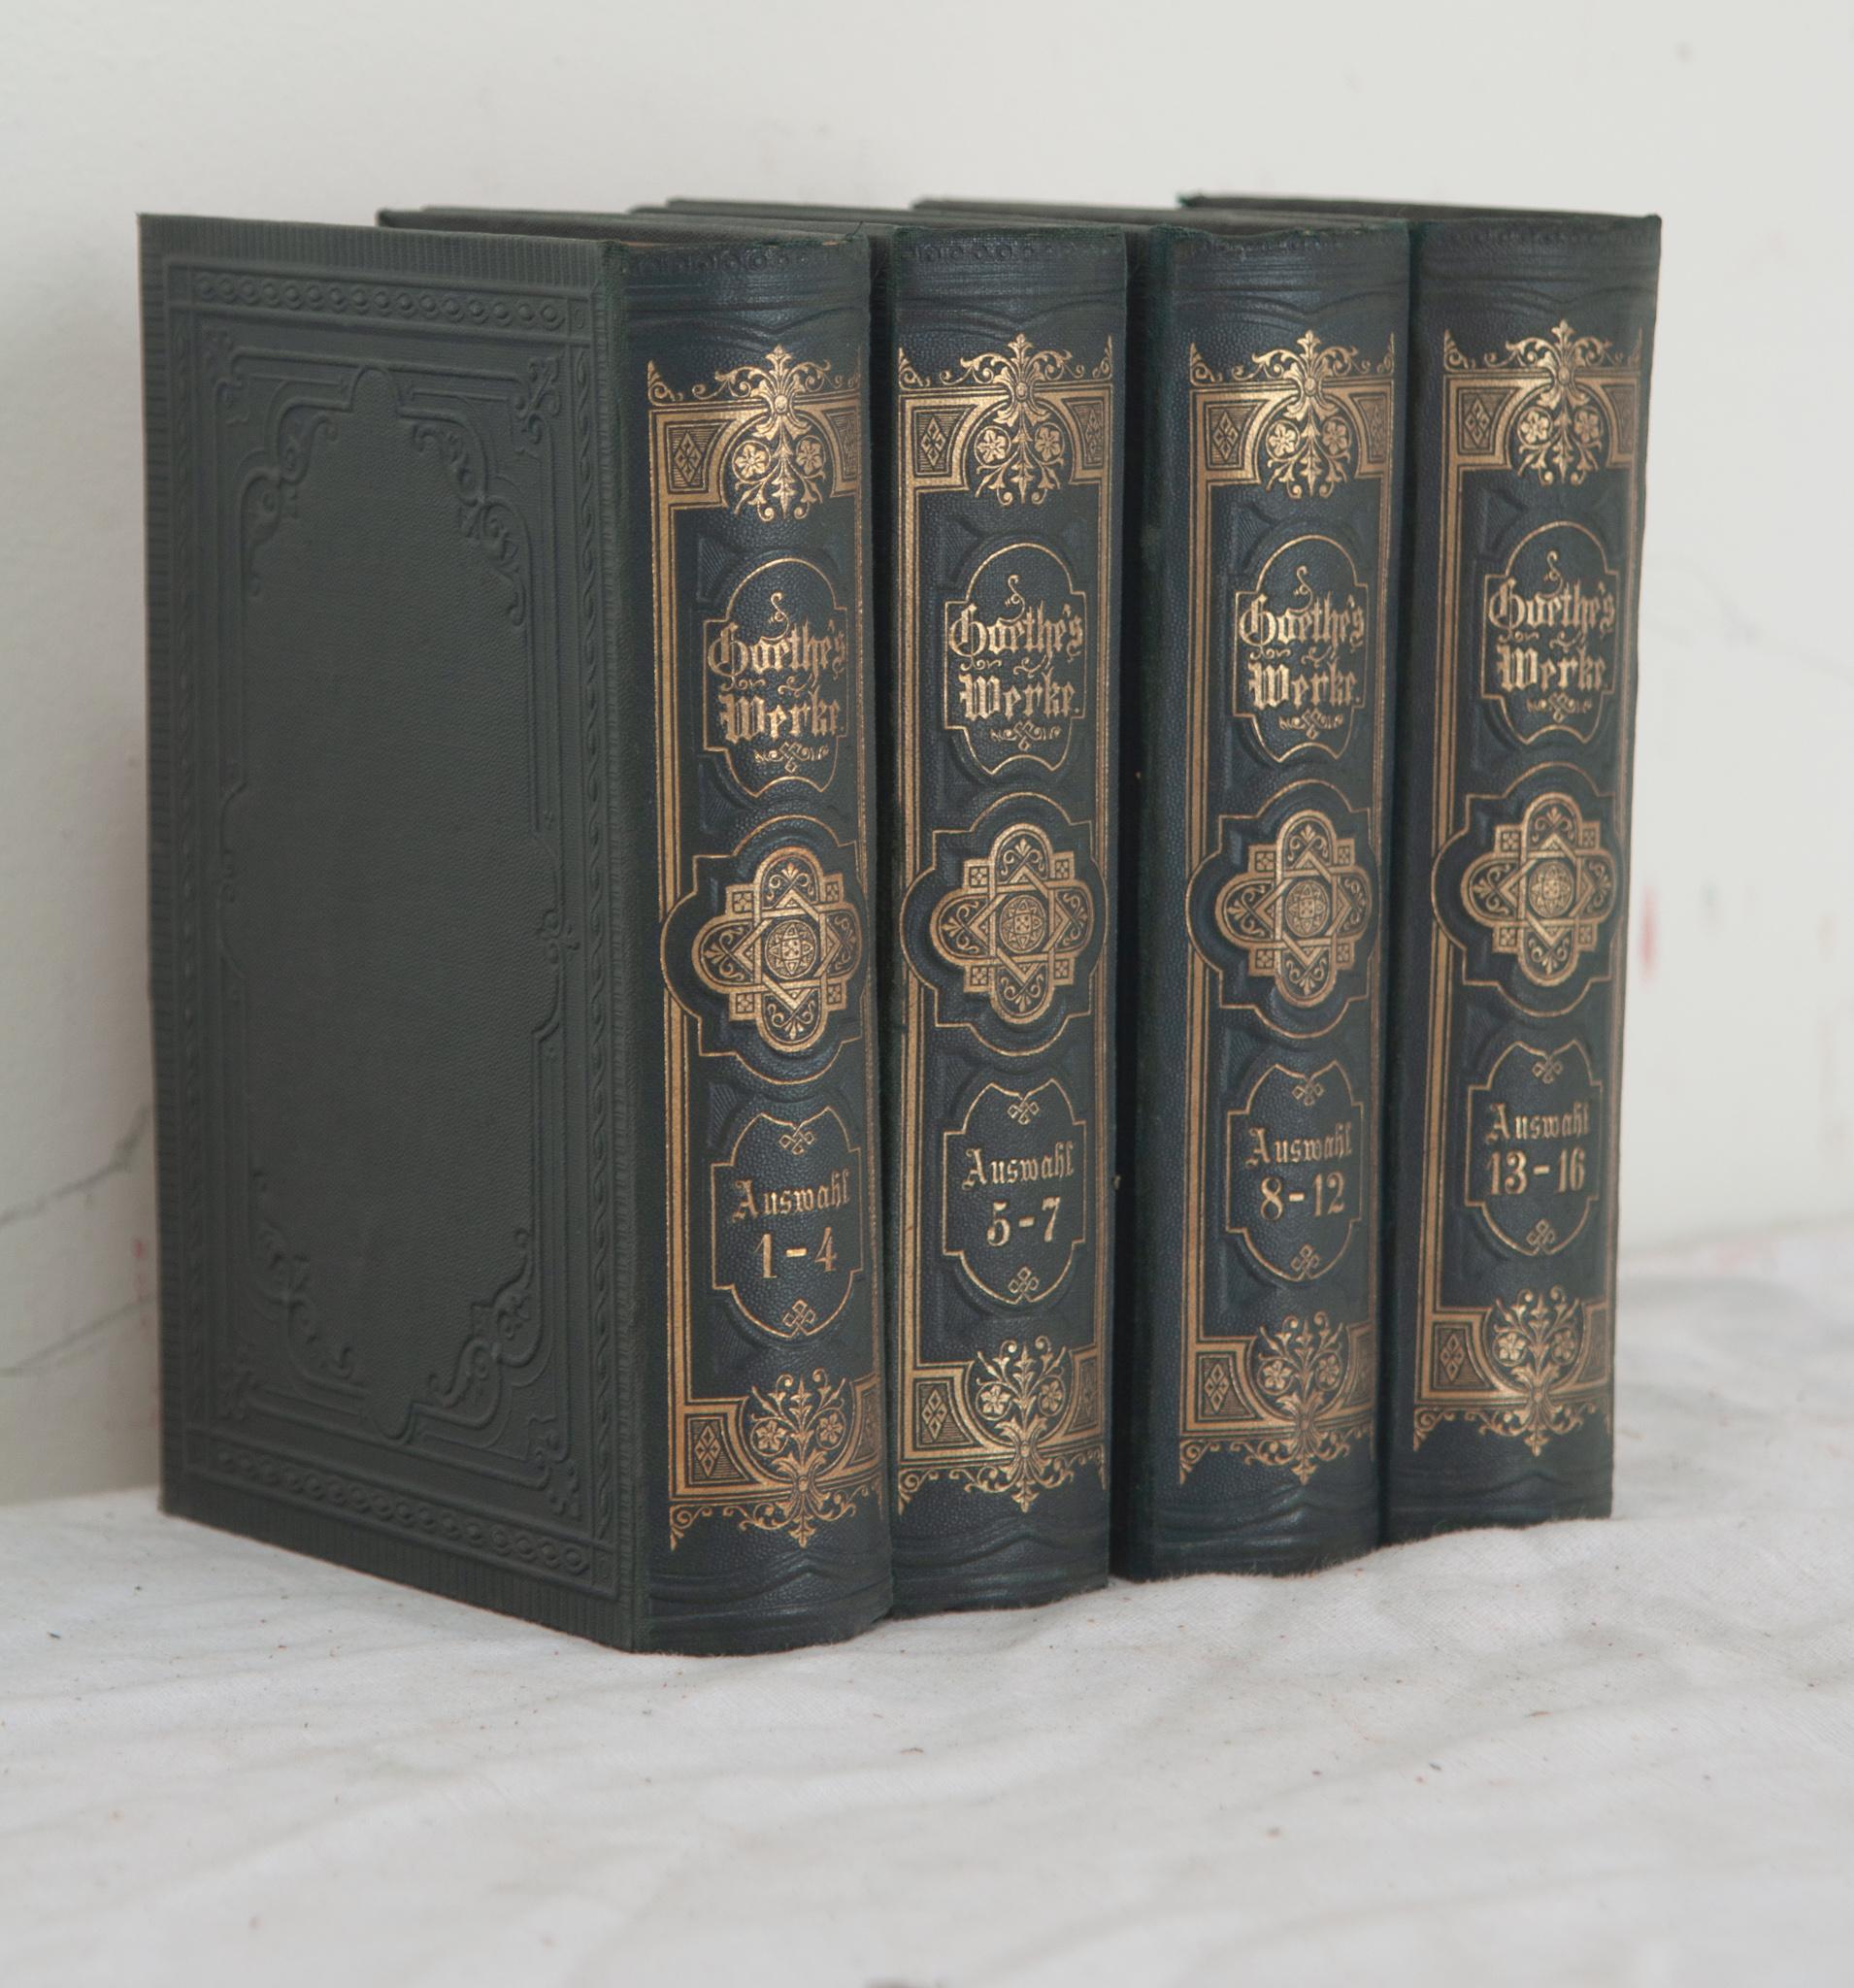 A collection of four volumes of poetry by German playwright and poet Johann Wolfgang von Goethe. This set of Goethe’s Werkes is bound in pressed fabric with gold lettering. The pages have signs of discoloration, make sure to view the detailed images